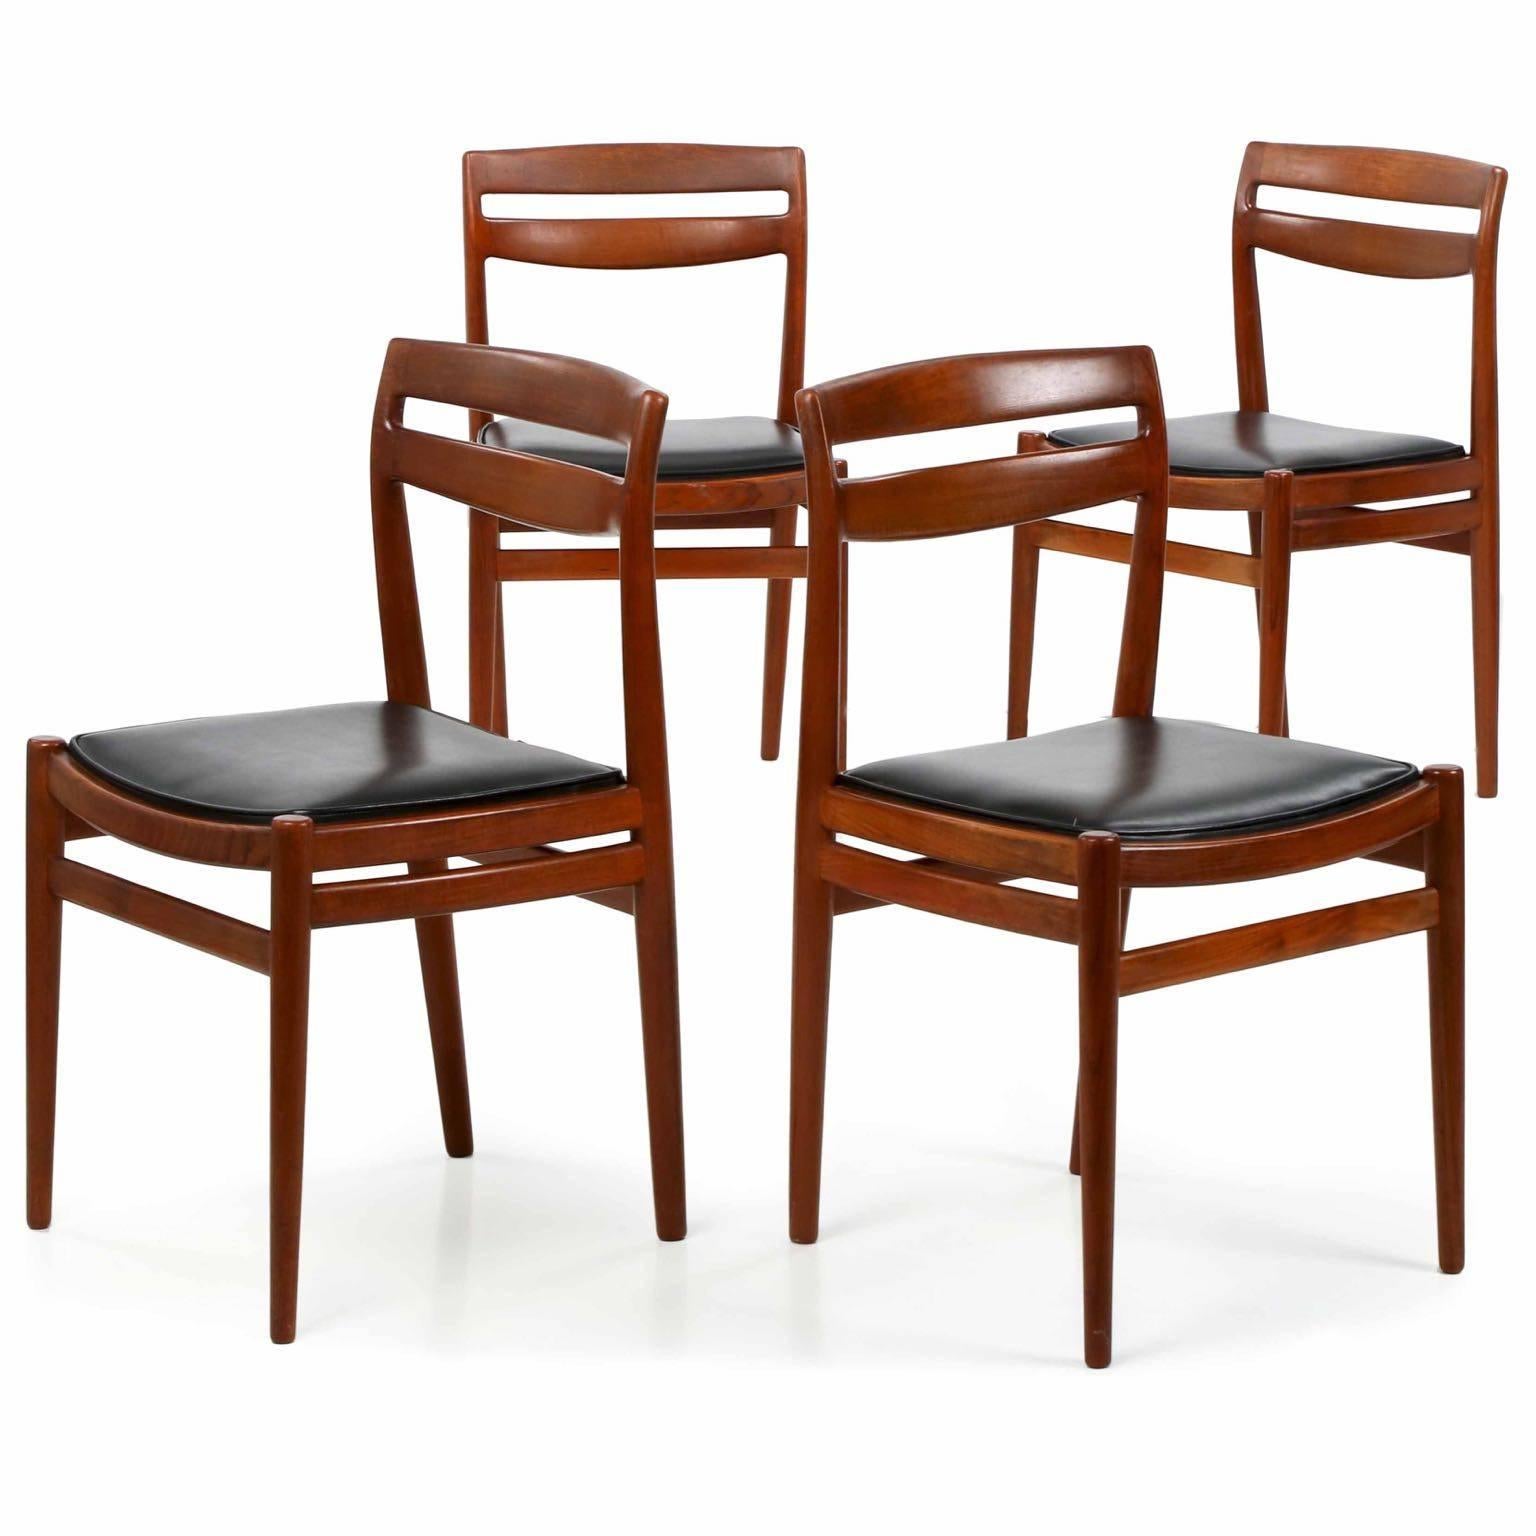 This is a gorgeous set of four Danish mid-century modern teakwood side chairs with crisp lines and clean curvature. The angularity of the chairs is softened by the bow of the crest, the matching curves of the seat rails and the gently tapered turned